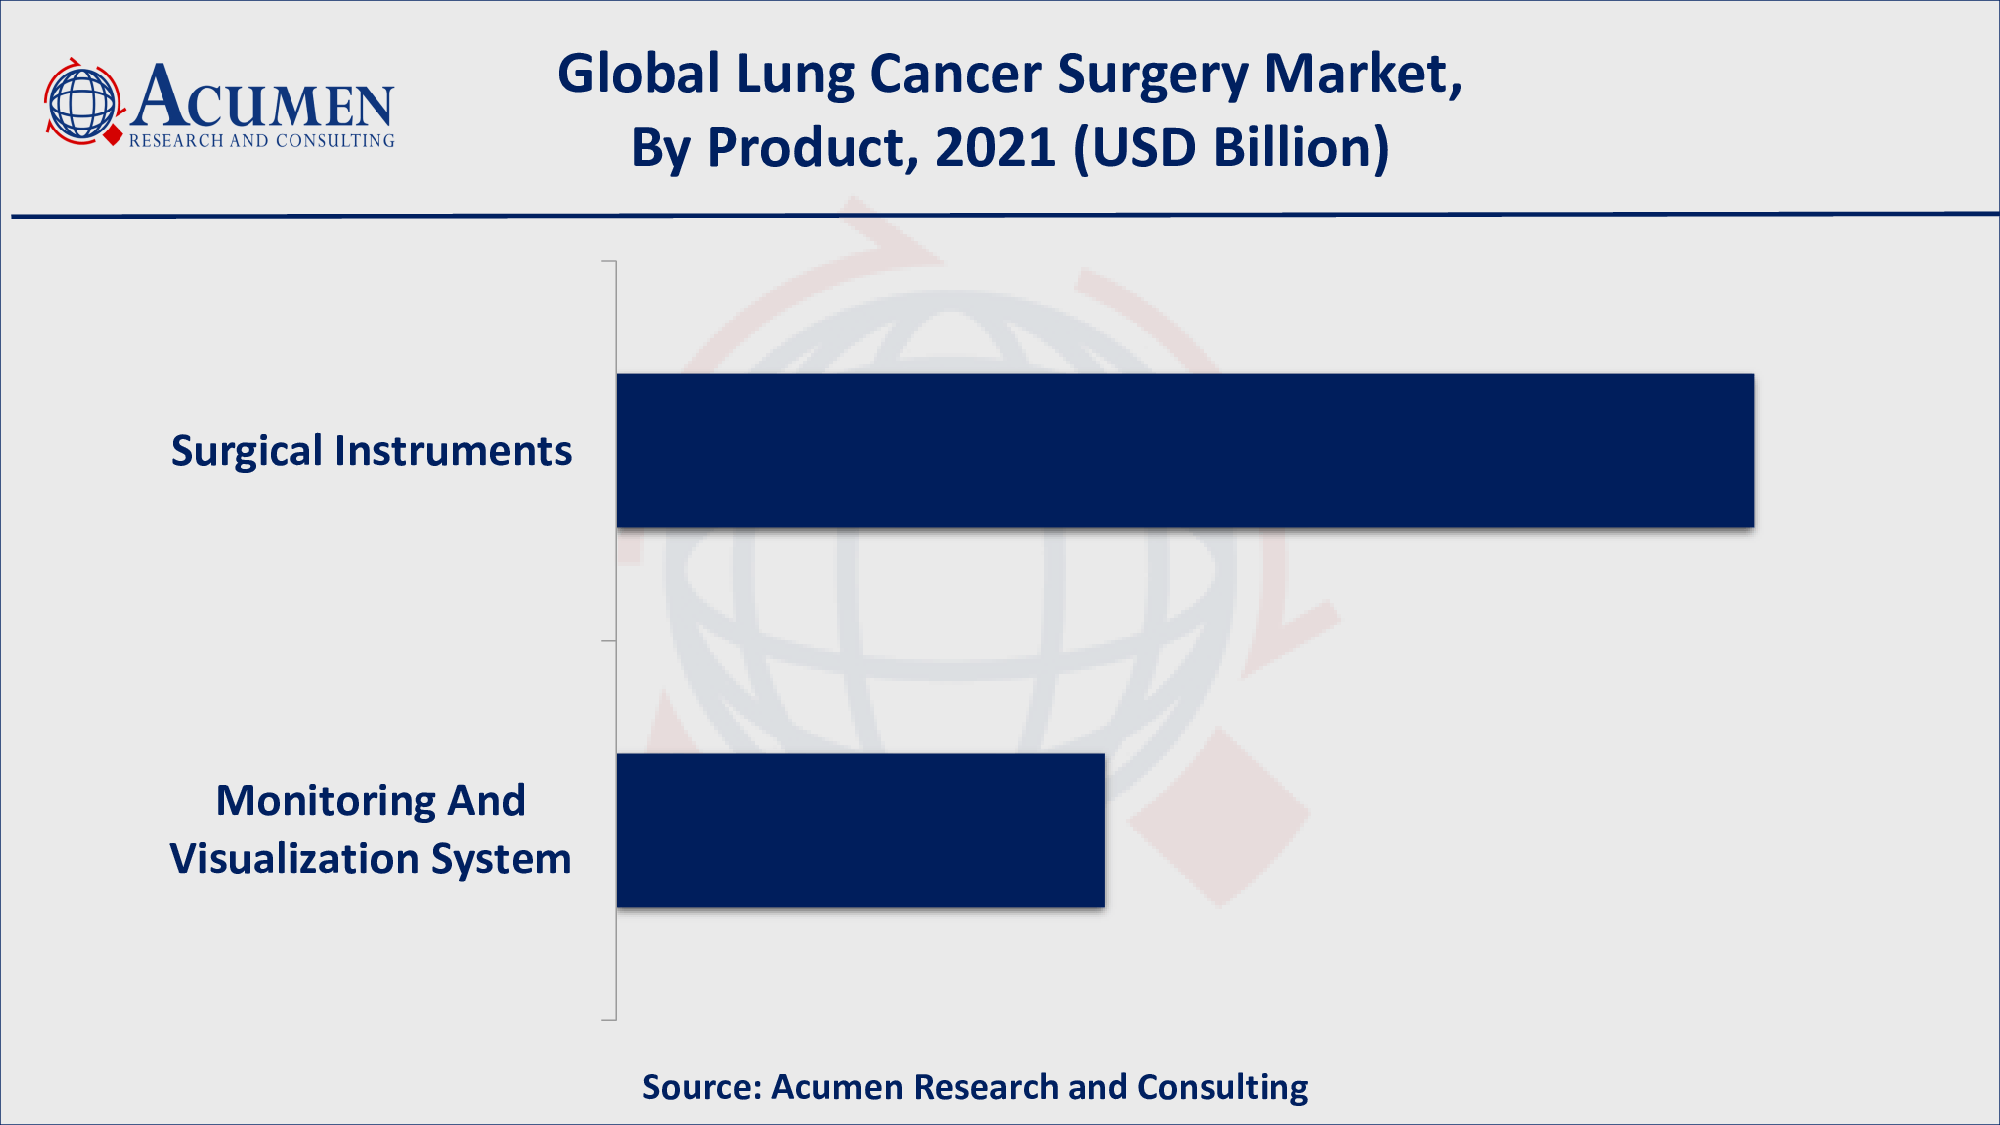 Increasing incidences of lung cancer will fuel the global lung cancer surgery market value